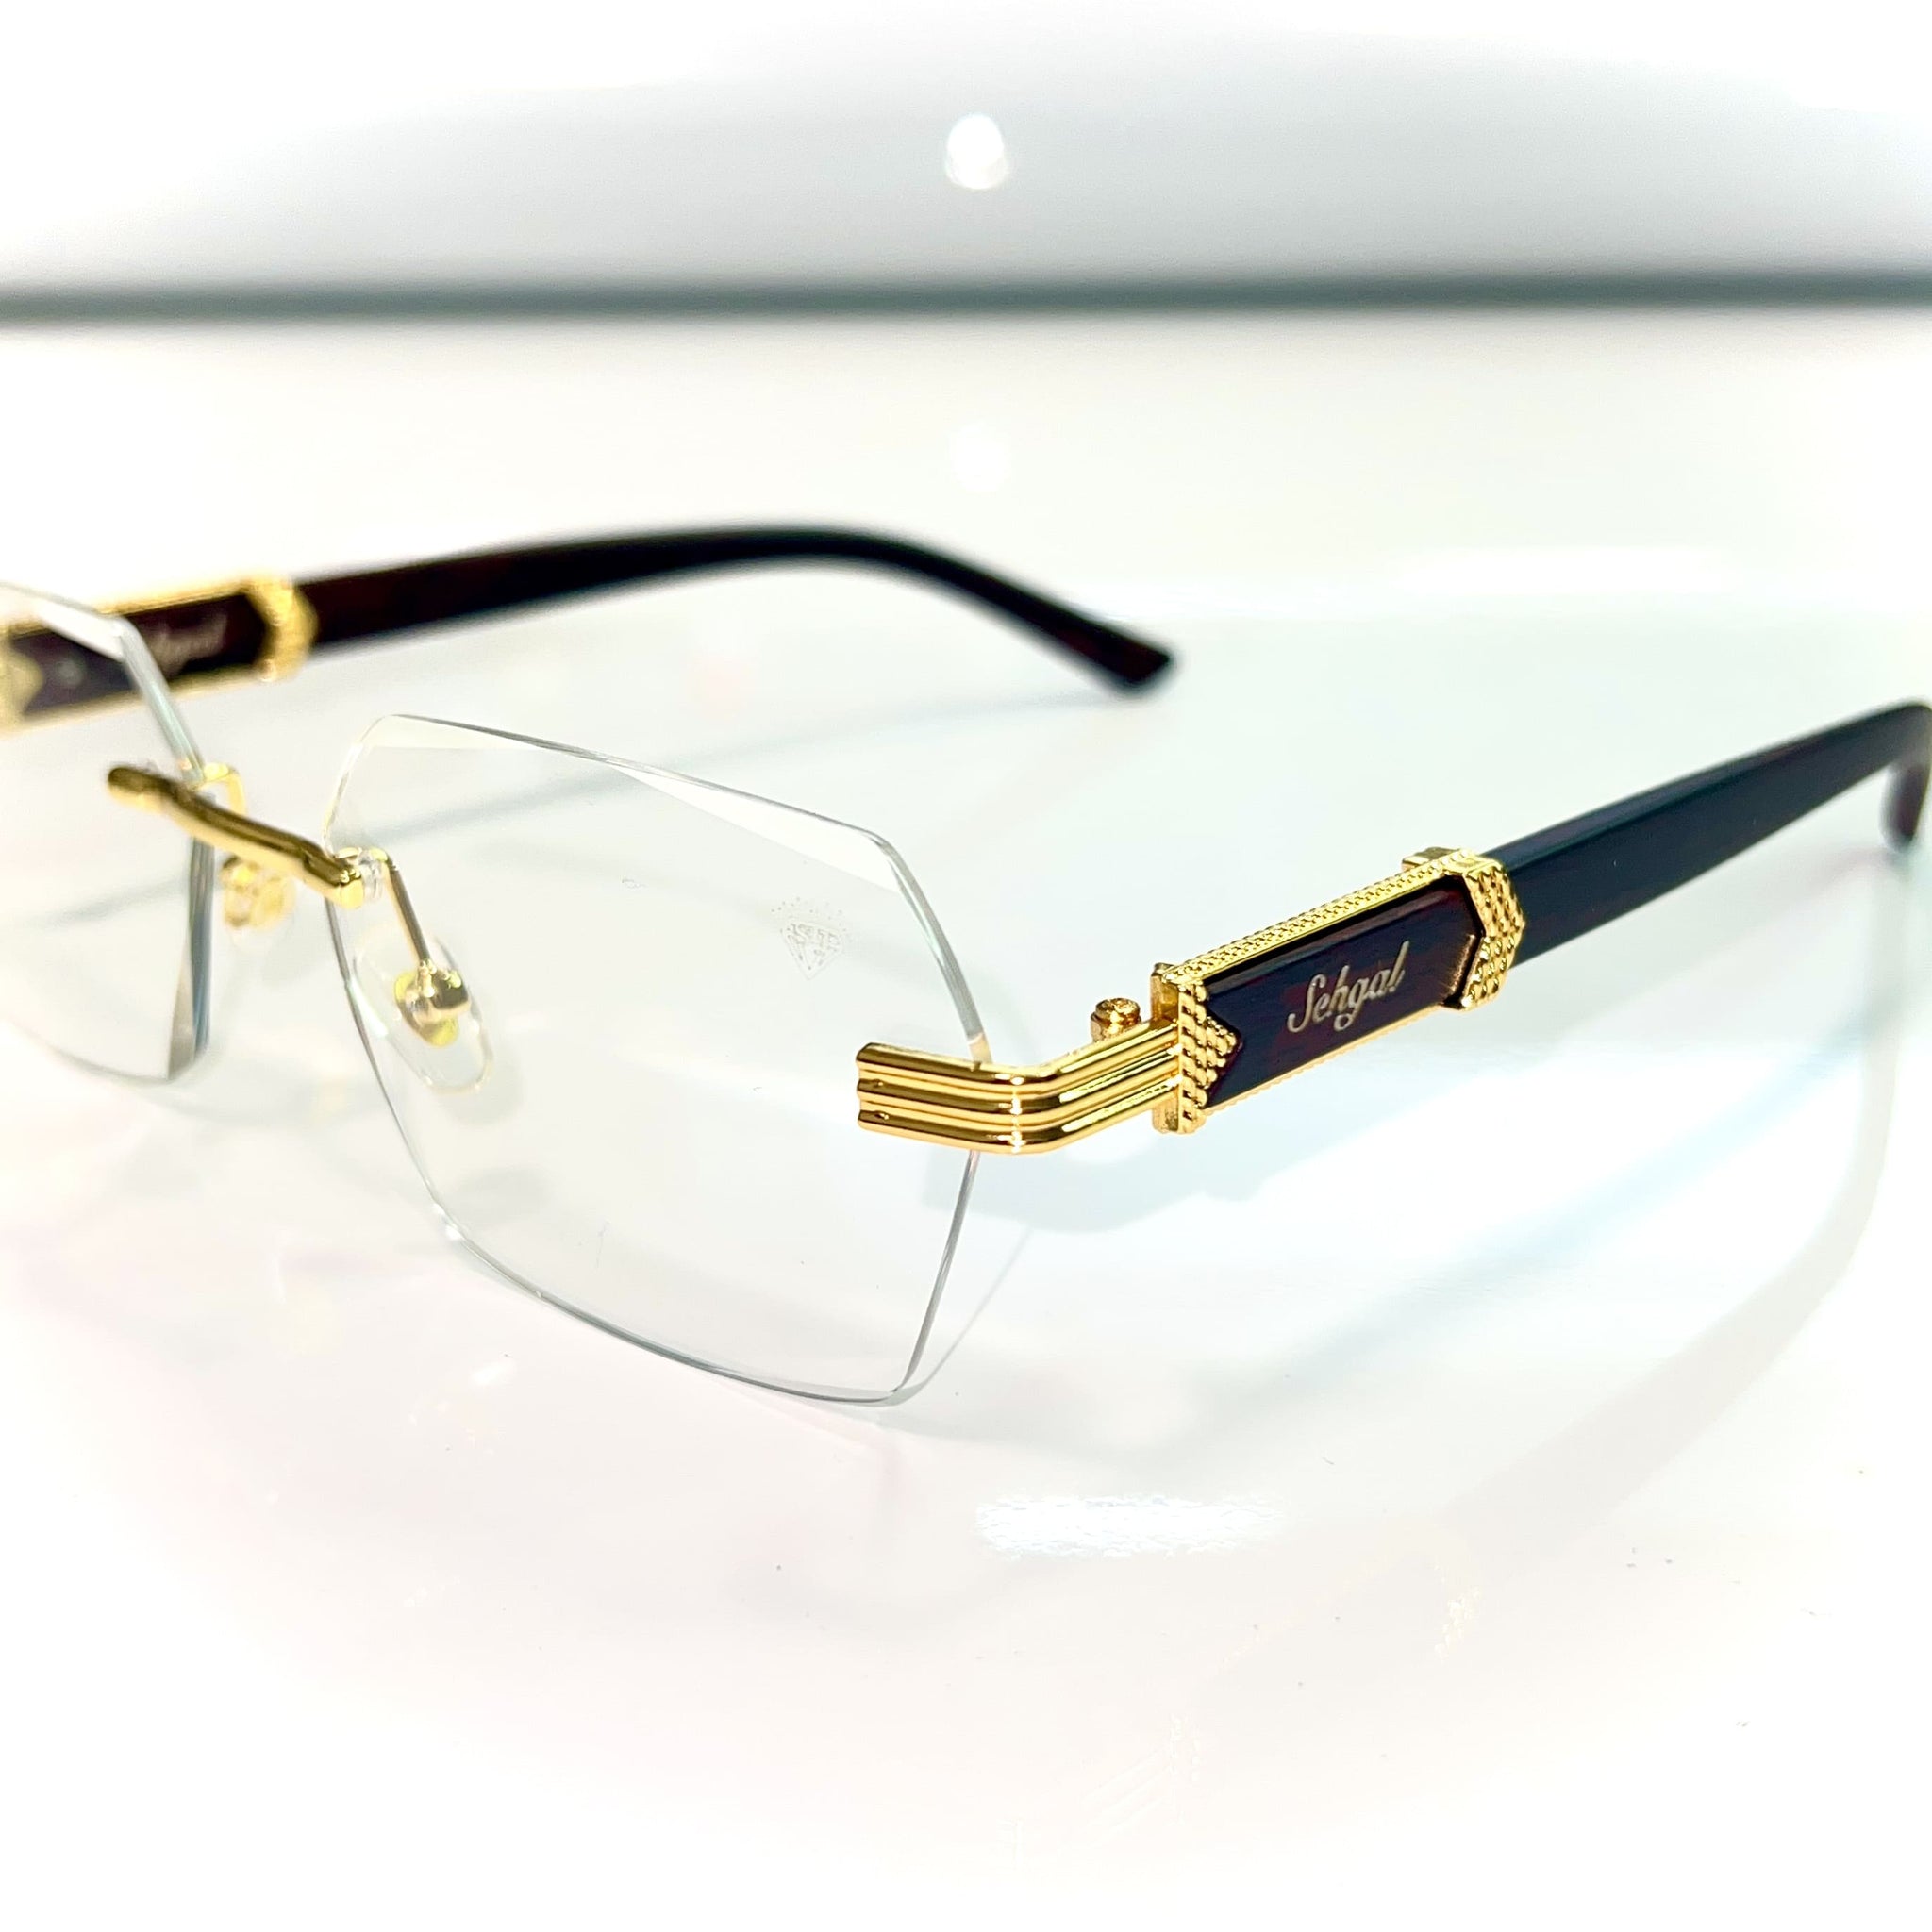 Woodcut Glasses - Sehgal Glasses - 14k gold plated - Transparent Collection